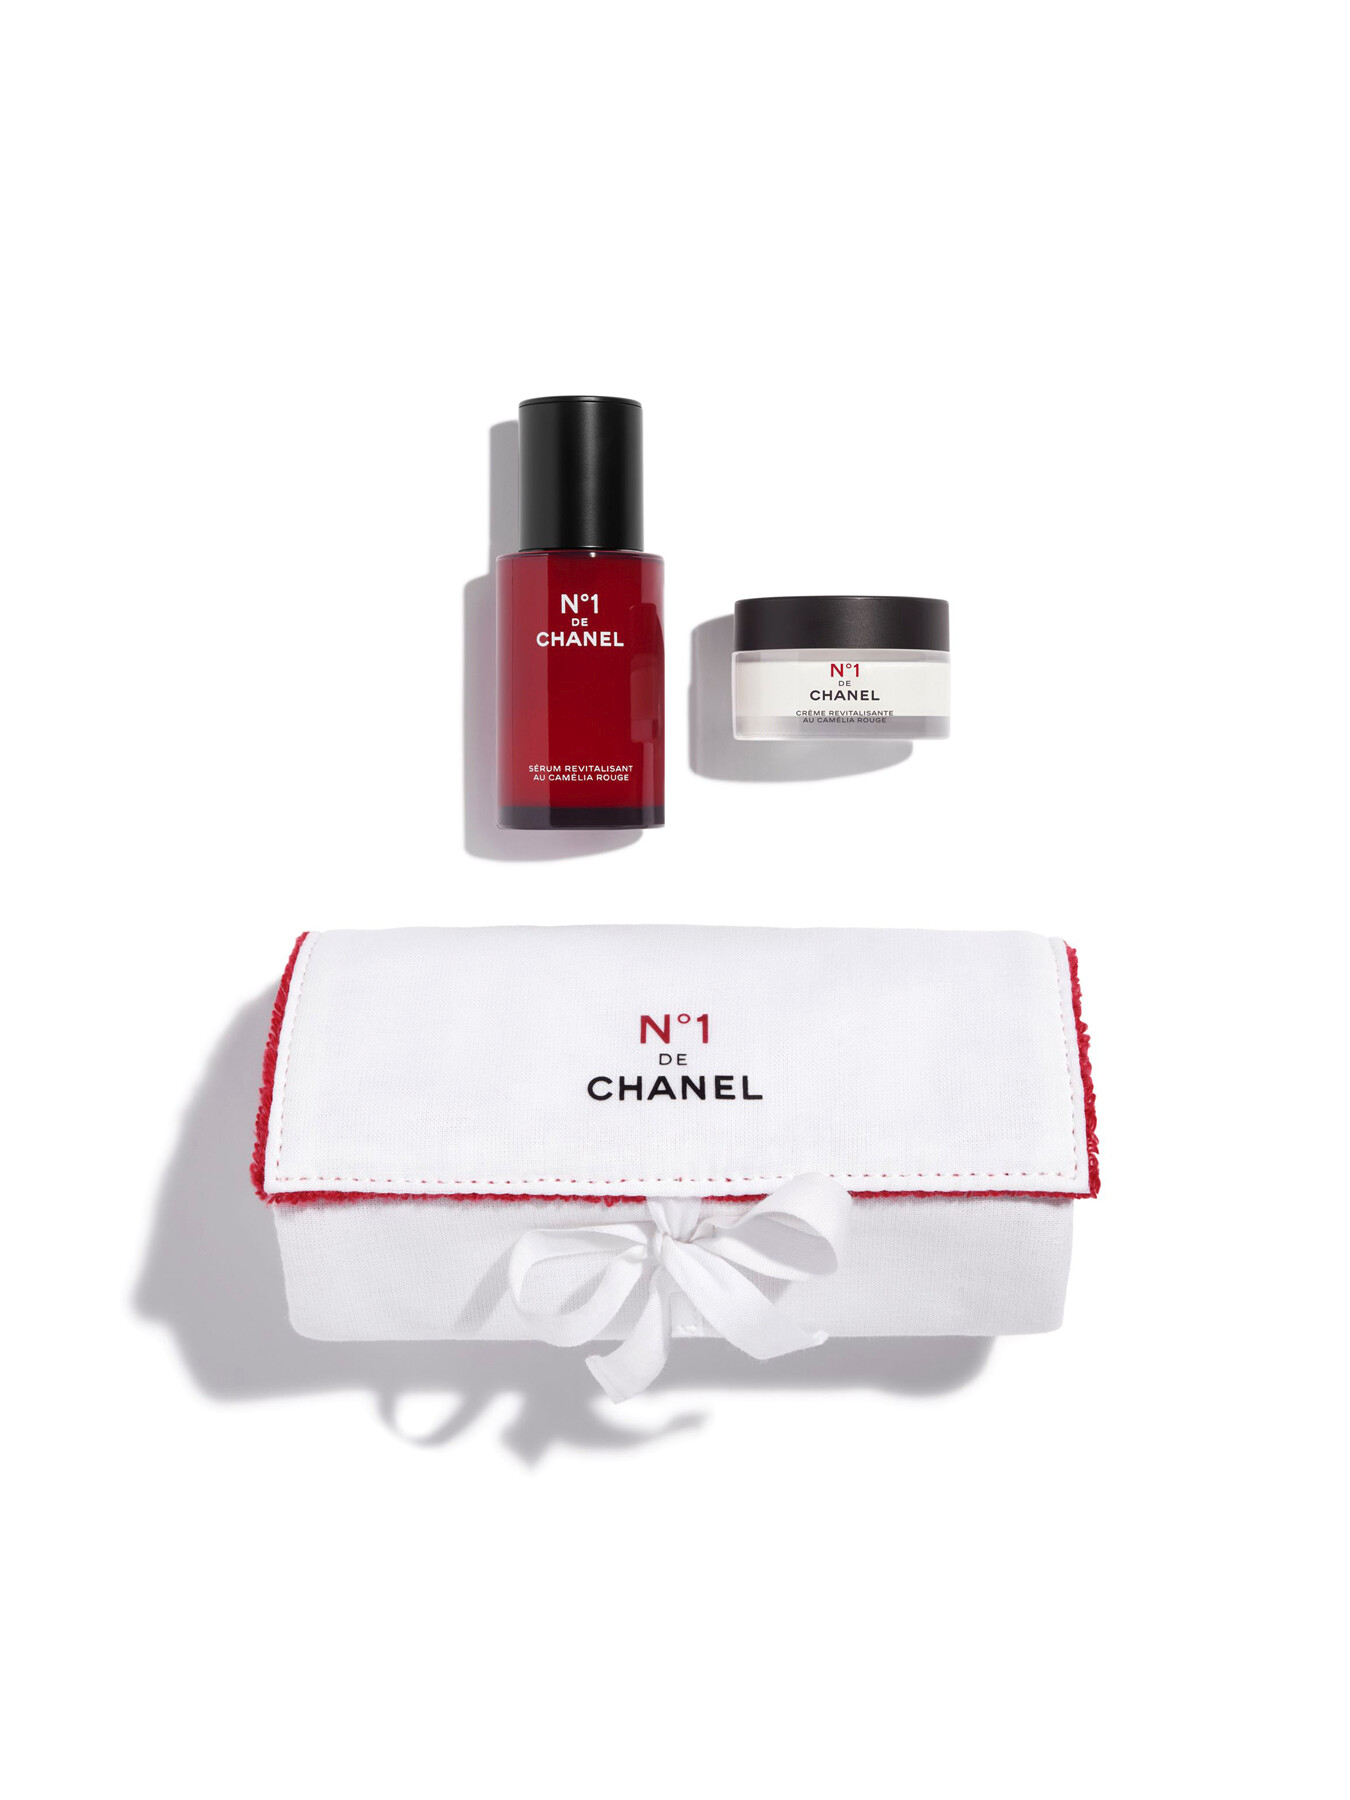 Chanel Beauty Unveils New N1 de Chanel Collection